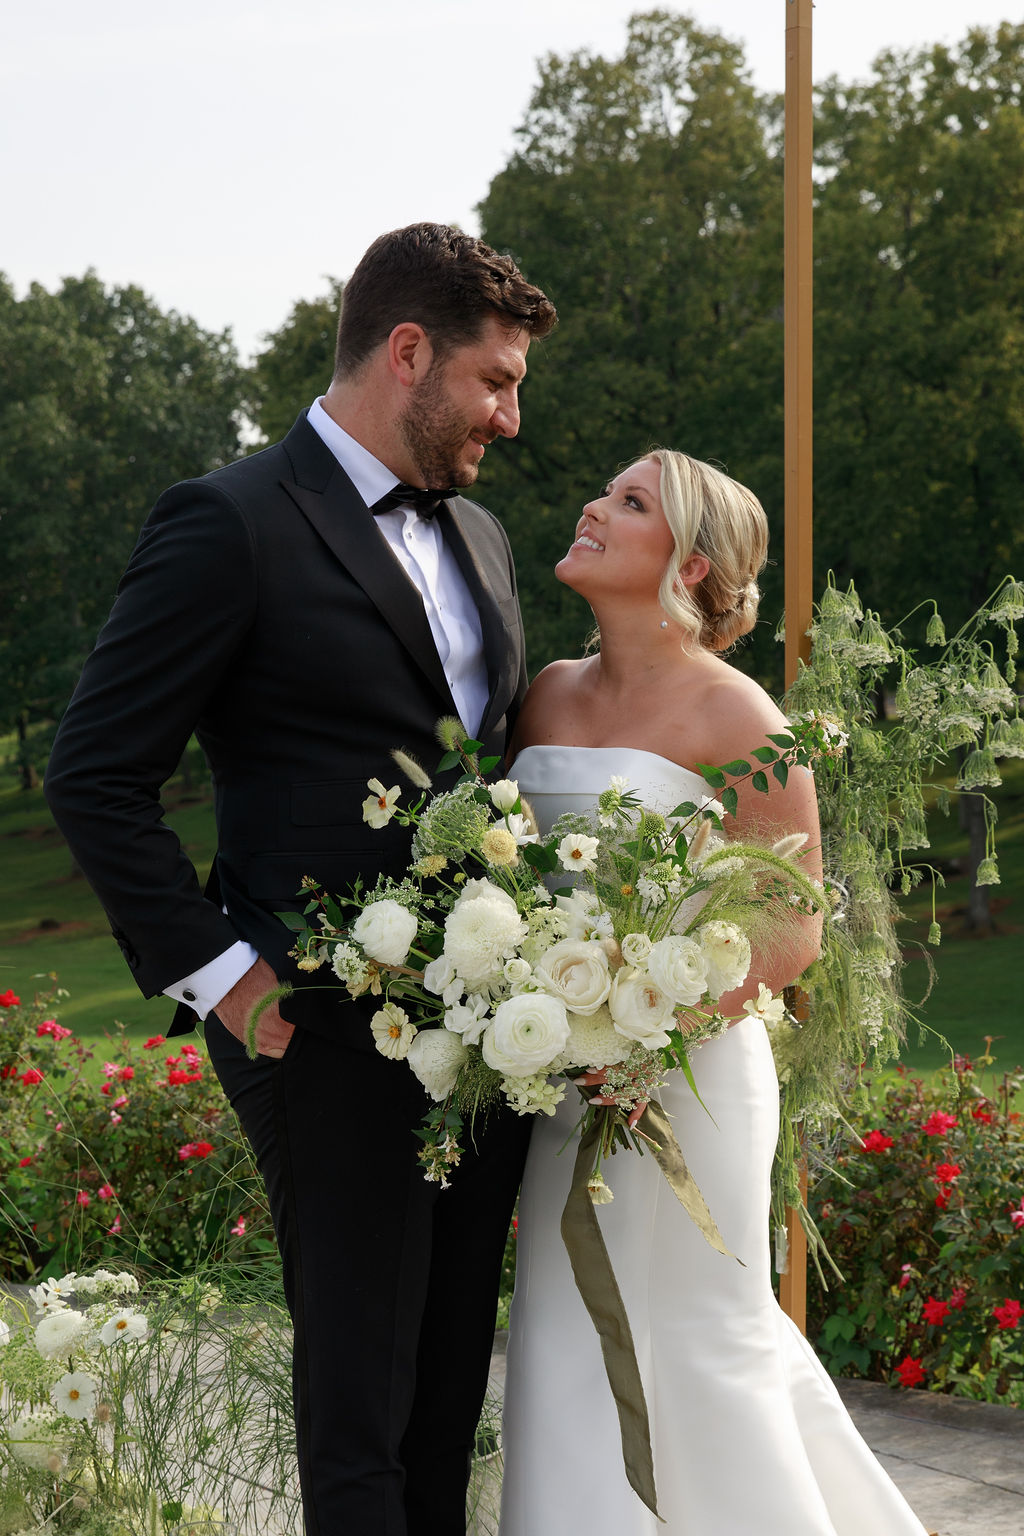 Newlyweds gaze at each other while standing in a rose garden and holding a large white bouquet washington dc wedding florist